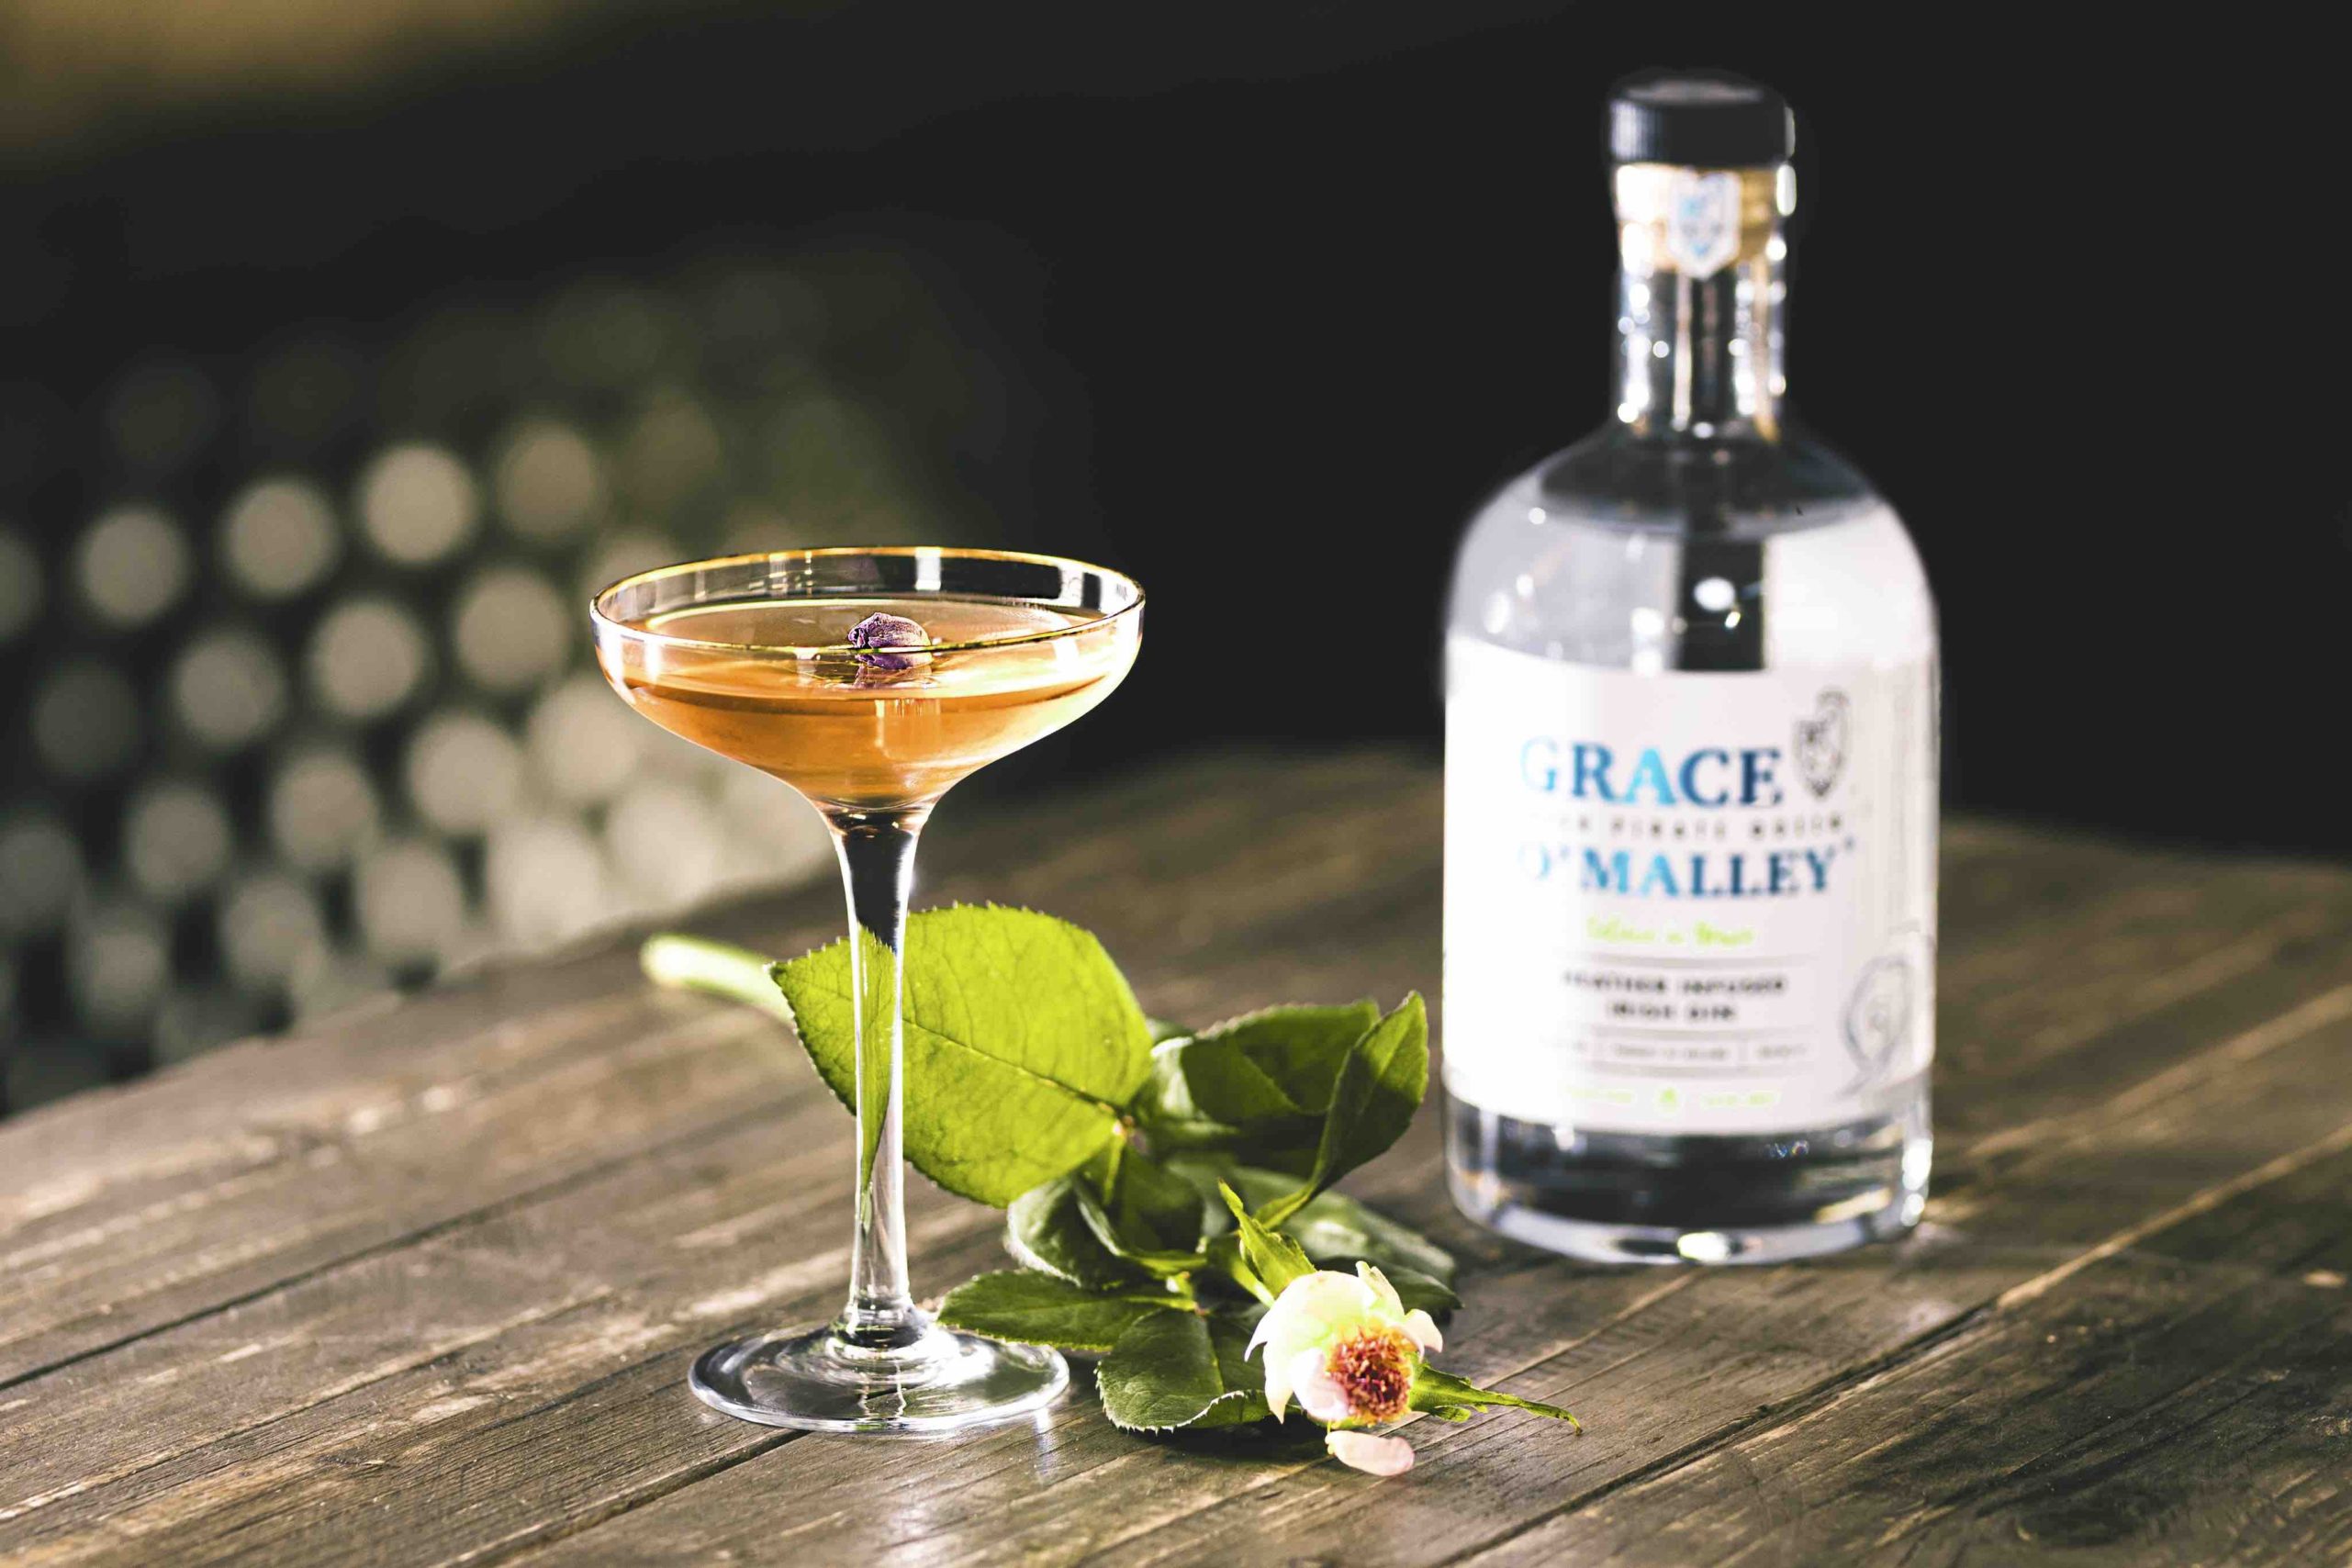 This Irish Drink Is One of the St. Patrick's Day Cocktail Recipes For Home Entertaining